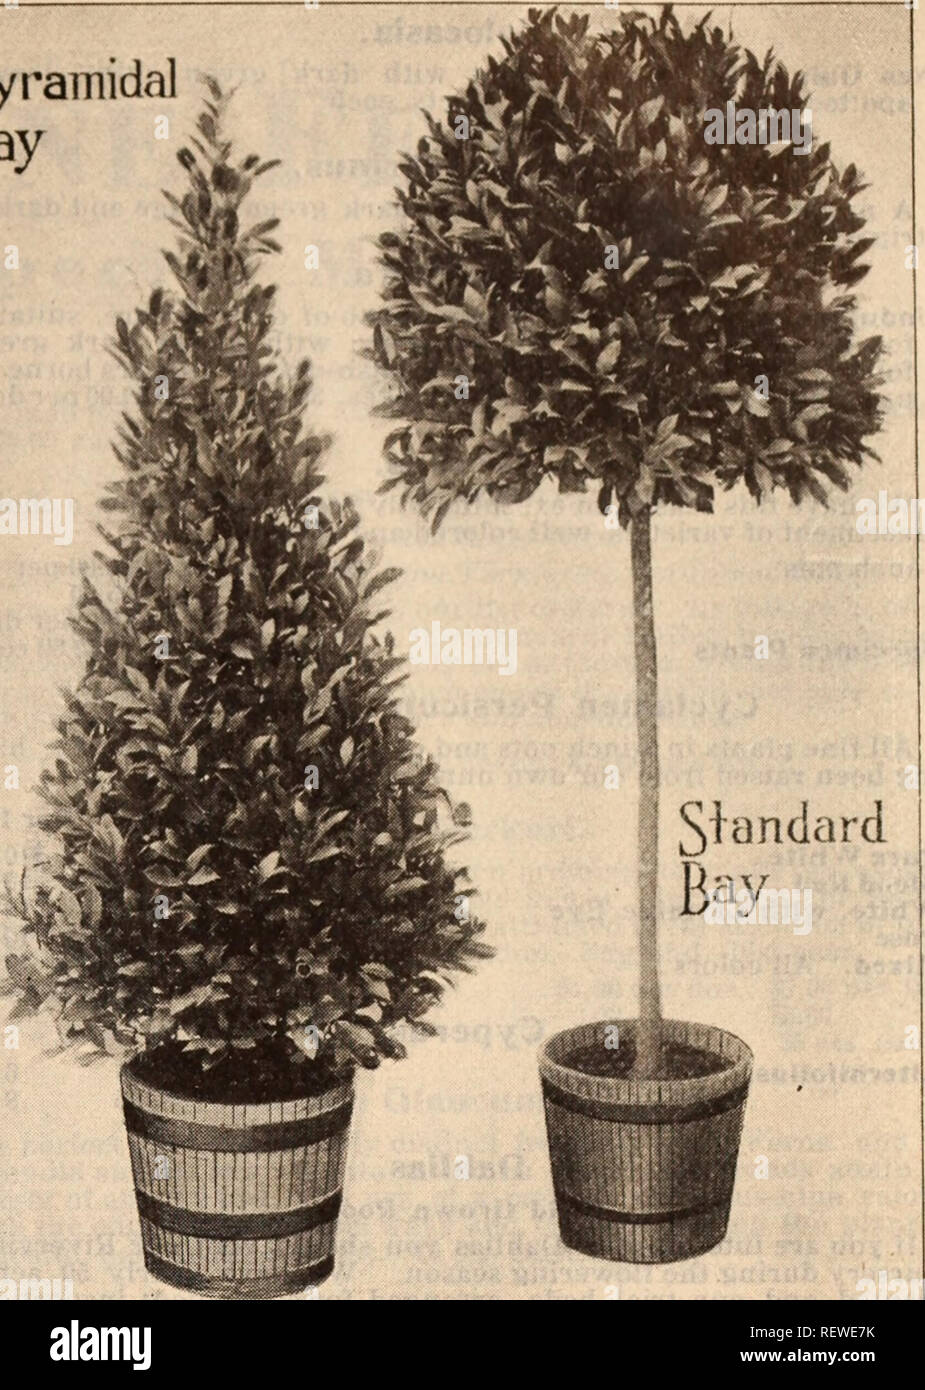 . Dreer's wholesale price list / Henry A. Dreer.. Nursery Catalogue. HENRY A. DREER, PHILADELPHIA. PA., WHOLESALE PRICE LIST 17 Bay Trees—(Continued) Pyramid-Shaped Each 3Vt feet high . . 16 to 18 inches diameter at base .... J2 50 5 &quot; ... 22 to 24 &quot; &quot; &quot; .... 5 00 6 &quot; ... 26 to 28 &quot; &quot; &quot; .... 7 50 6 &quot; .... 30 to 32 :* &quot; &quot; . 10 00 7 &quot; ... 32 to 34 &quot; &quot; &quot; . 12 50 8 &quot; ... 34 to 36 &quot; &quot; '• .... 15 00 Boxwoods (Ready October 25th). Bush-shaped Box. A nice line of bushy plants, the smaller sizes being especially u Stock Photo